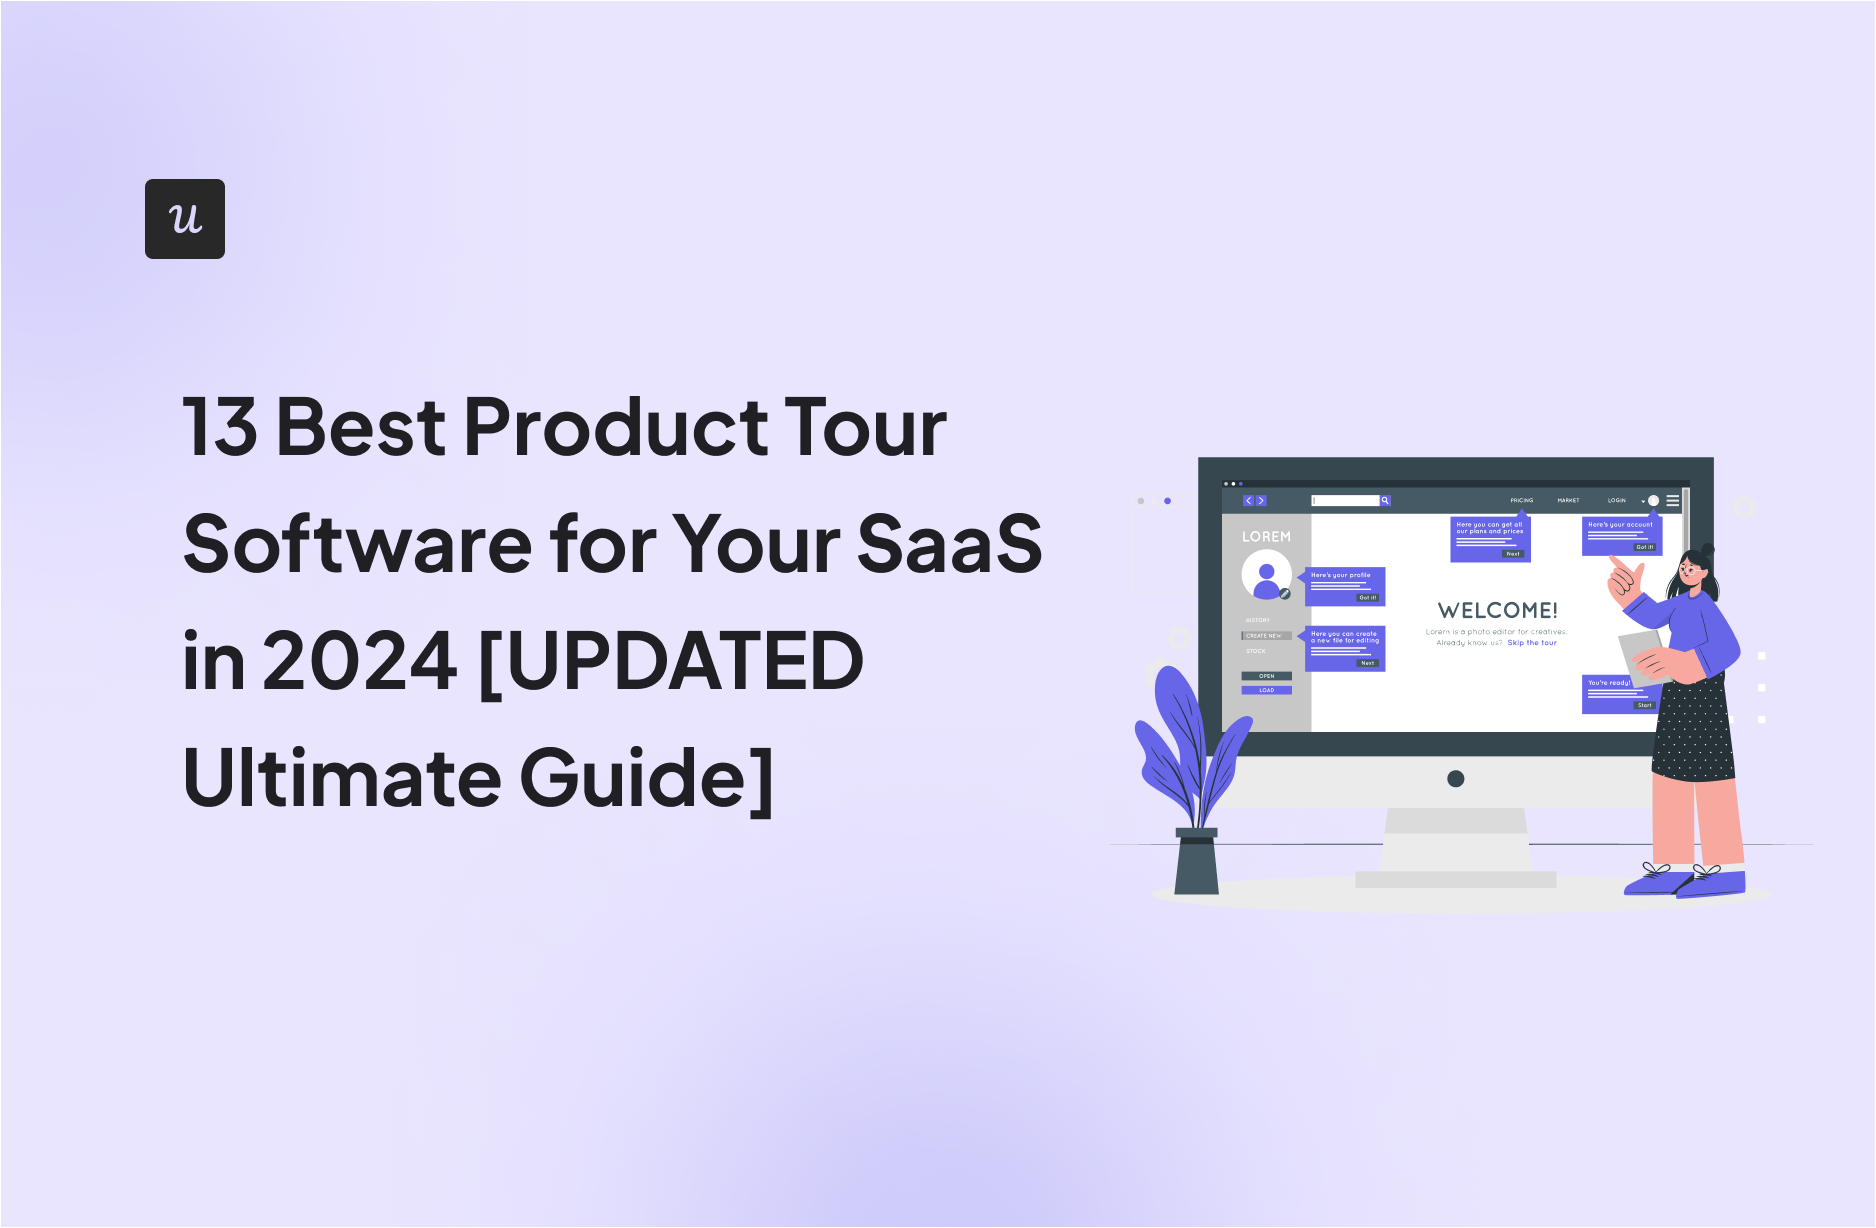 13 Best Product Tour Software for your SaaS in 2024 [UPDATED Ultimate Guide]